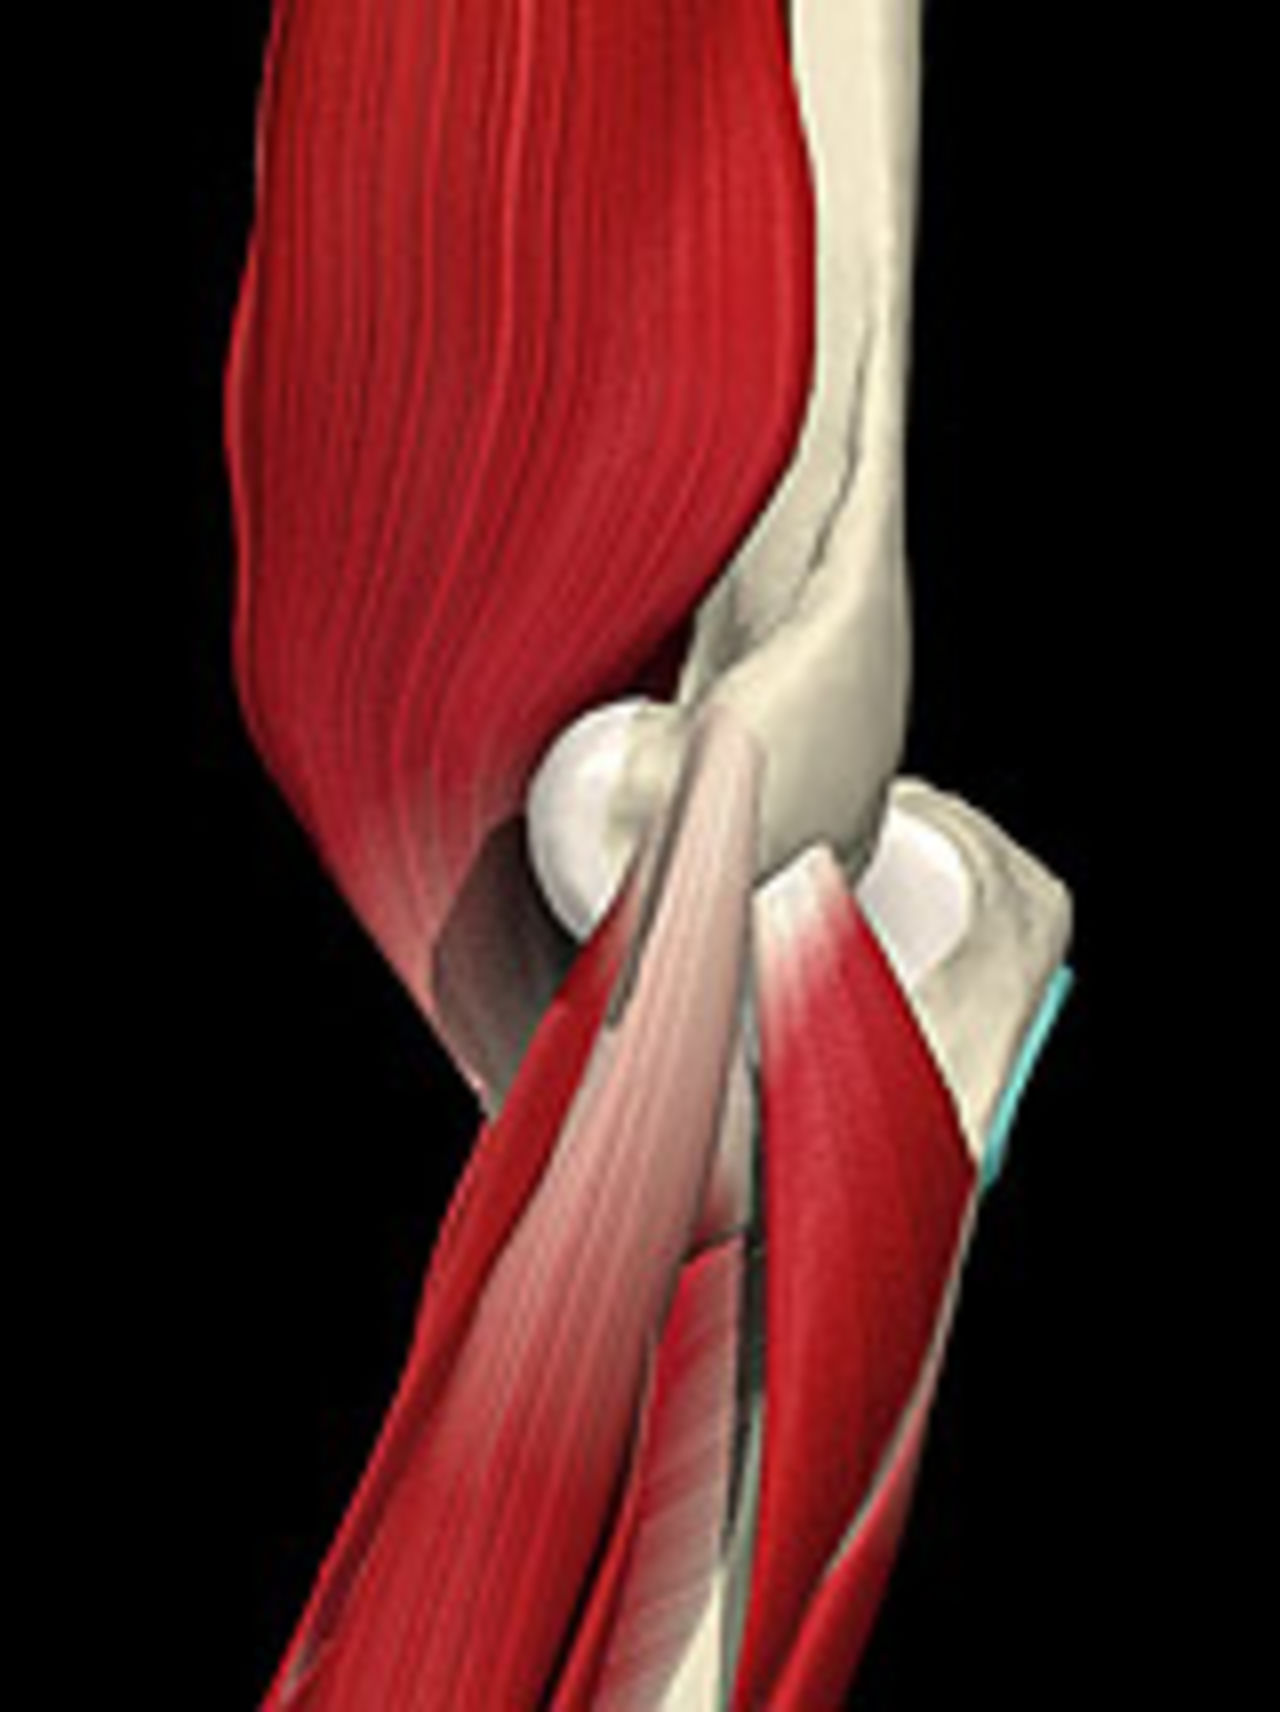 The lateral elbow showing where the extensor muscles of the forearm are attached